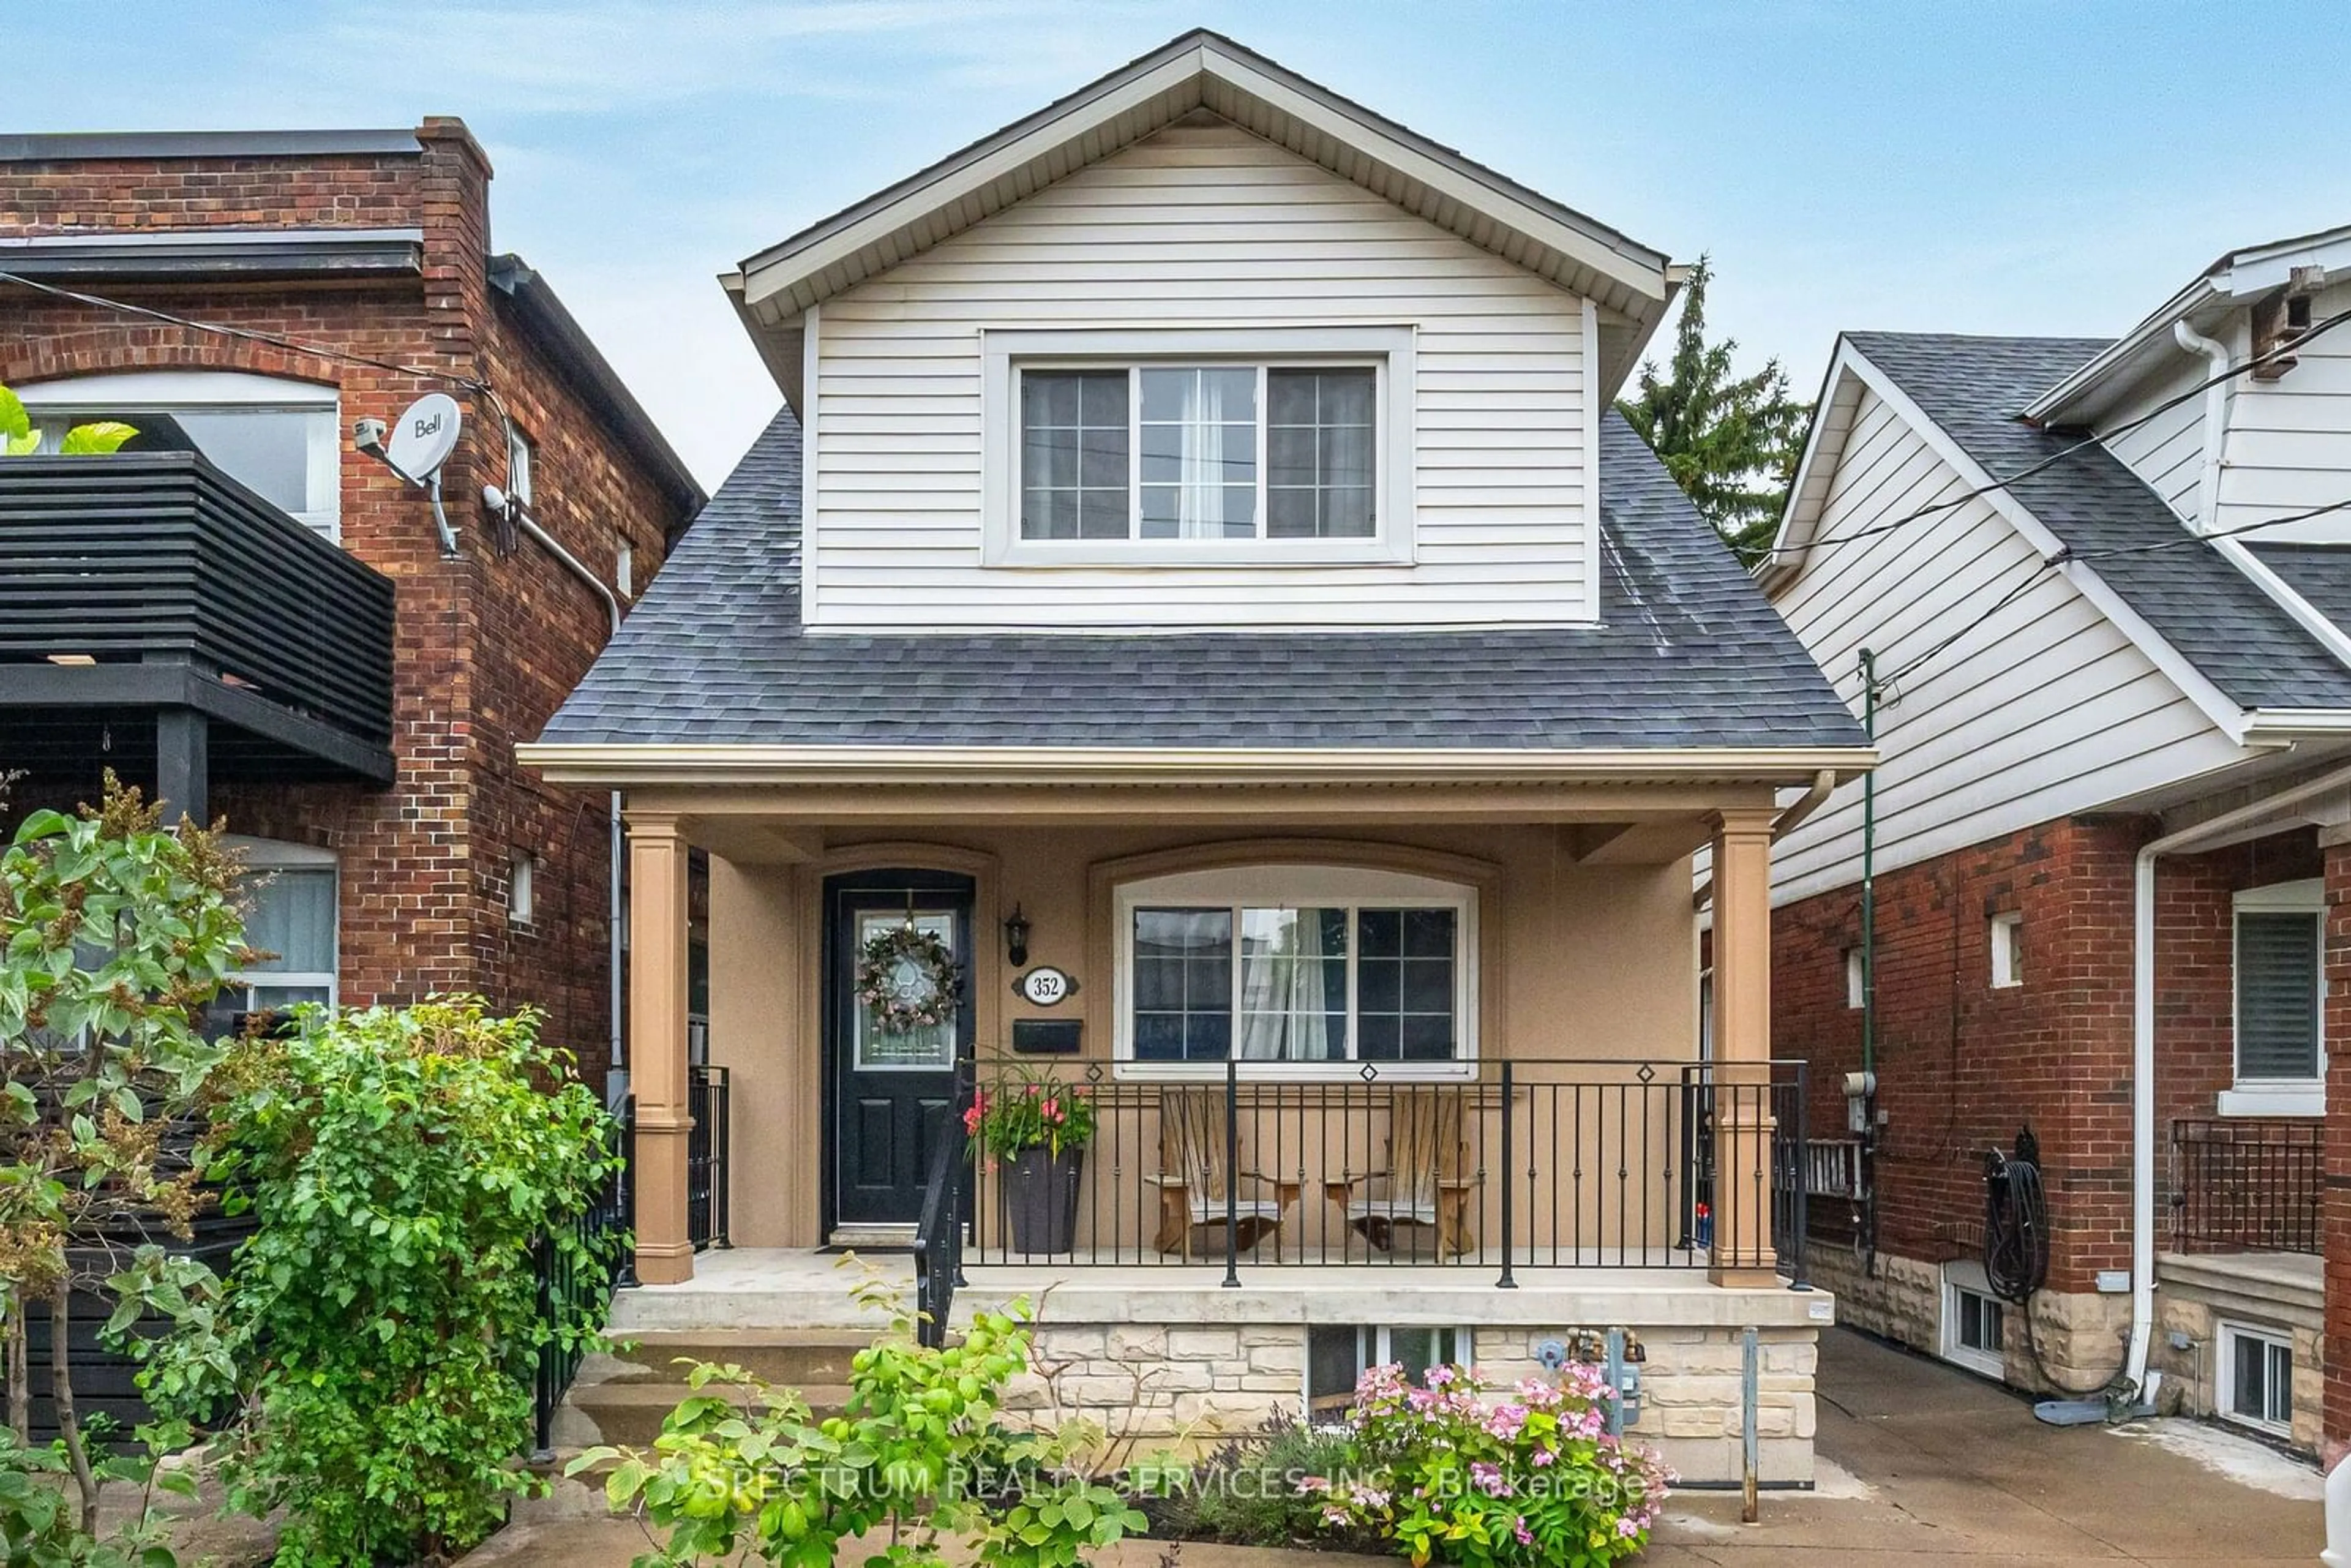 Home with brick exterior material for 352 Sammon Ave, Toronto Ontario M4J 2A5